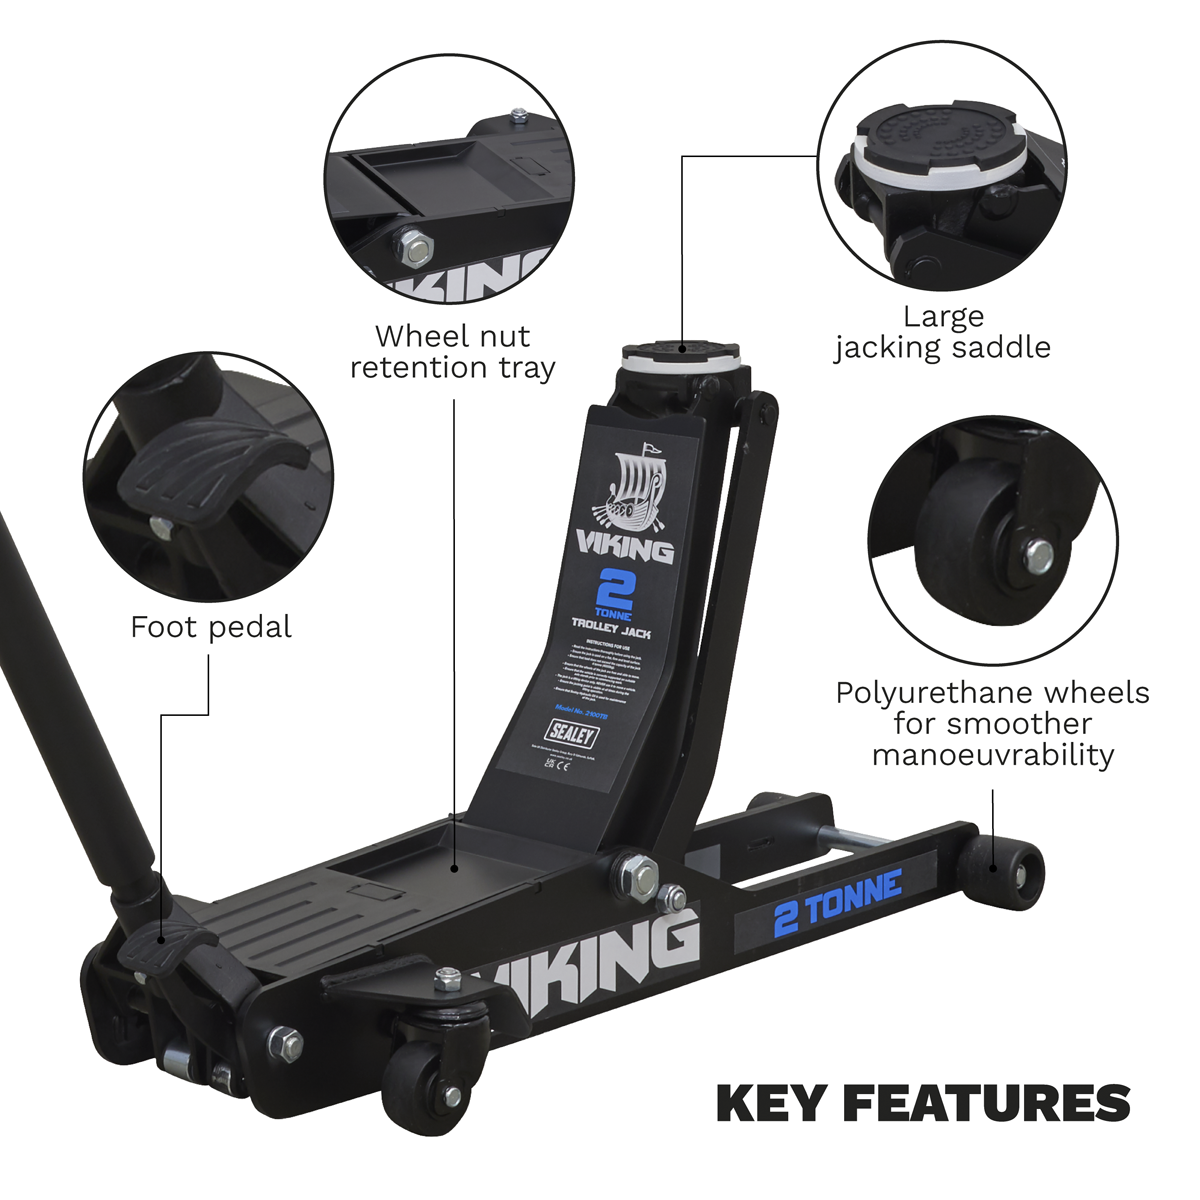 Sealey Viking Low Profile Long Reach Trolley Jack 2 Tonne 2100TB Features